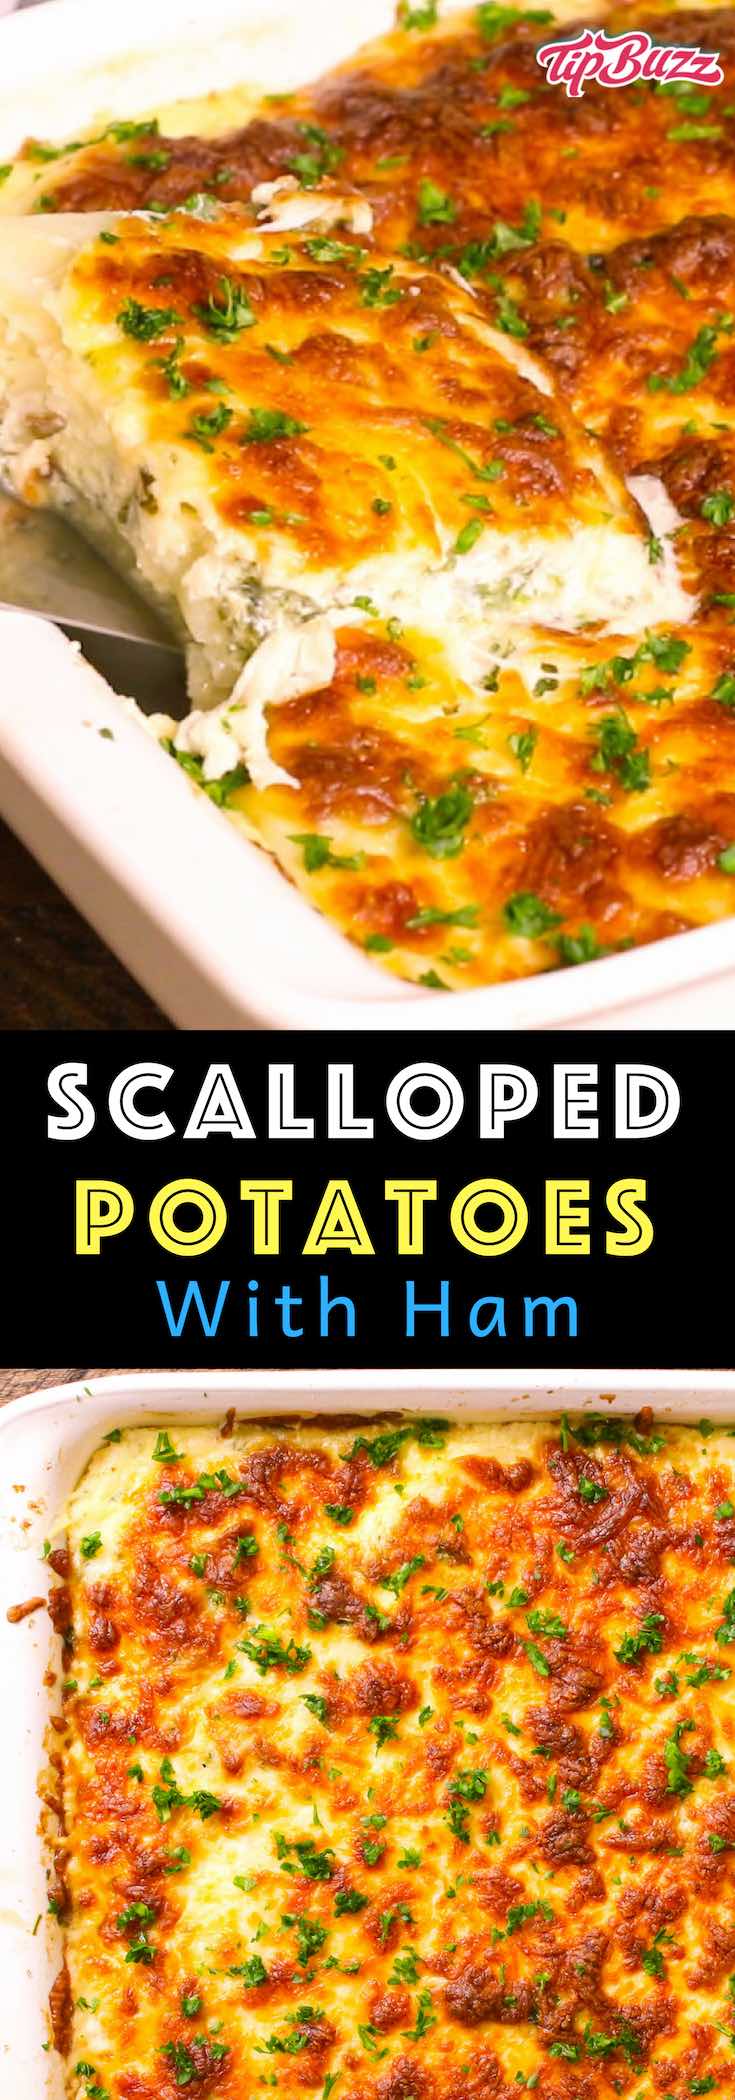 Scalloped Potatoes and Ham loaded with tender potatoes, layered with ham and cheese and smothered in a rich and creamy sauce. The best way to achieve soft and creamy potatoes is by par-boiling the potatoes first before baking. This is the best scalloped potatoes recipe ever! 